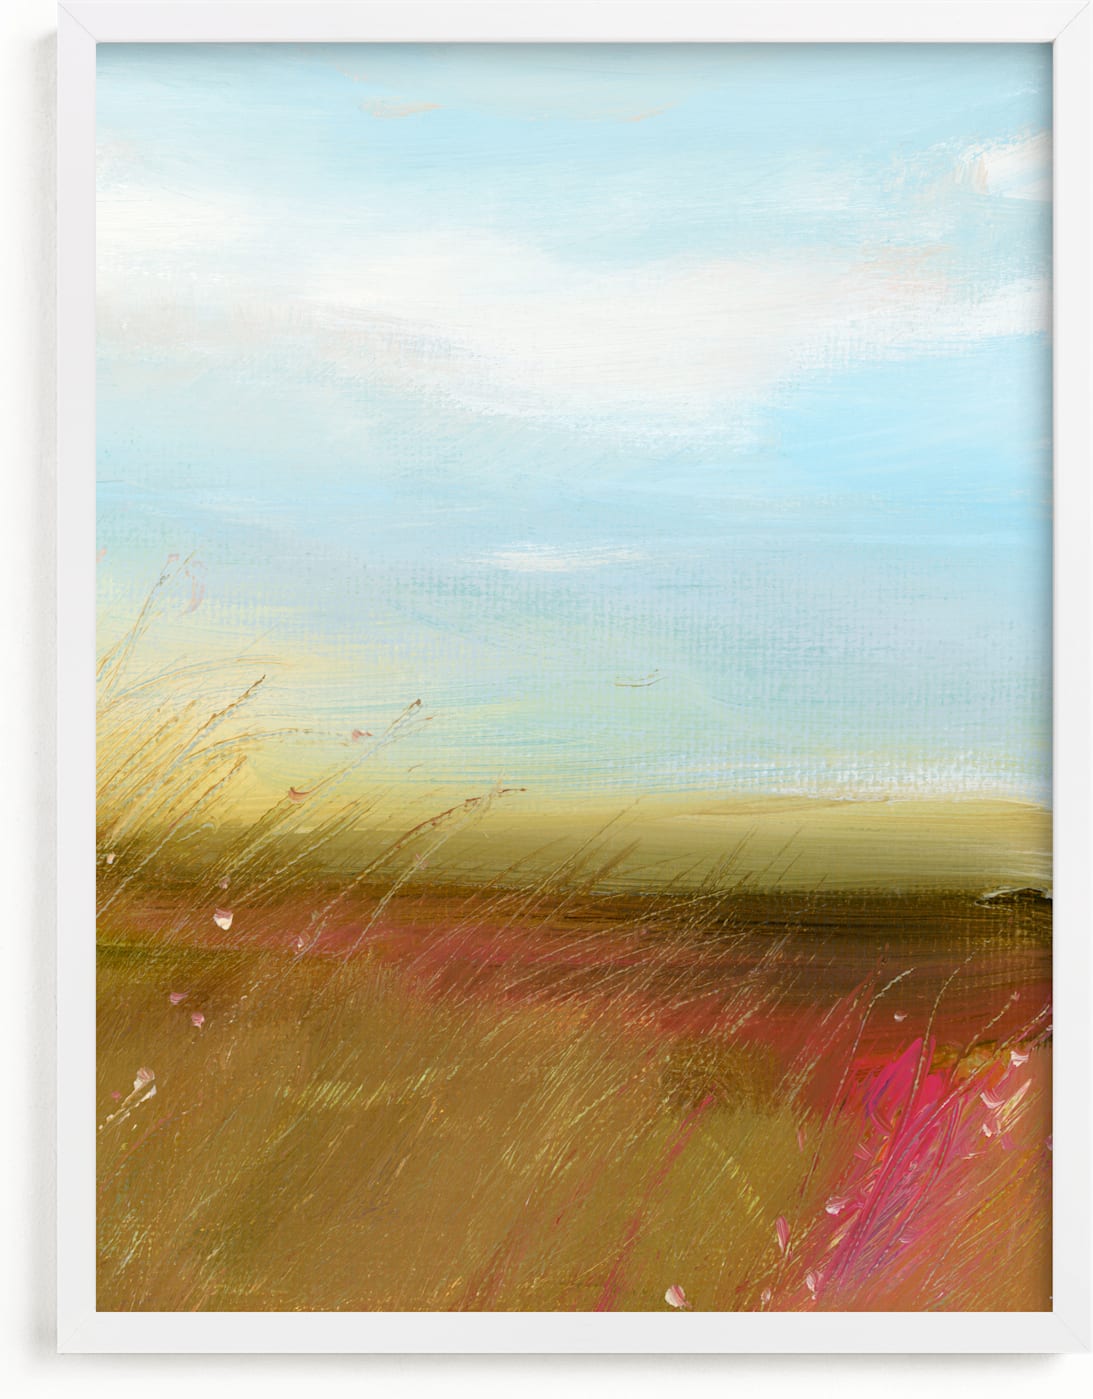 This is a blue, pink, green art by Lindsay Megahed called Afternoon Breeze II.